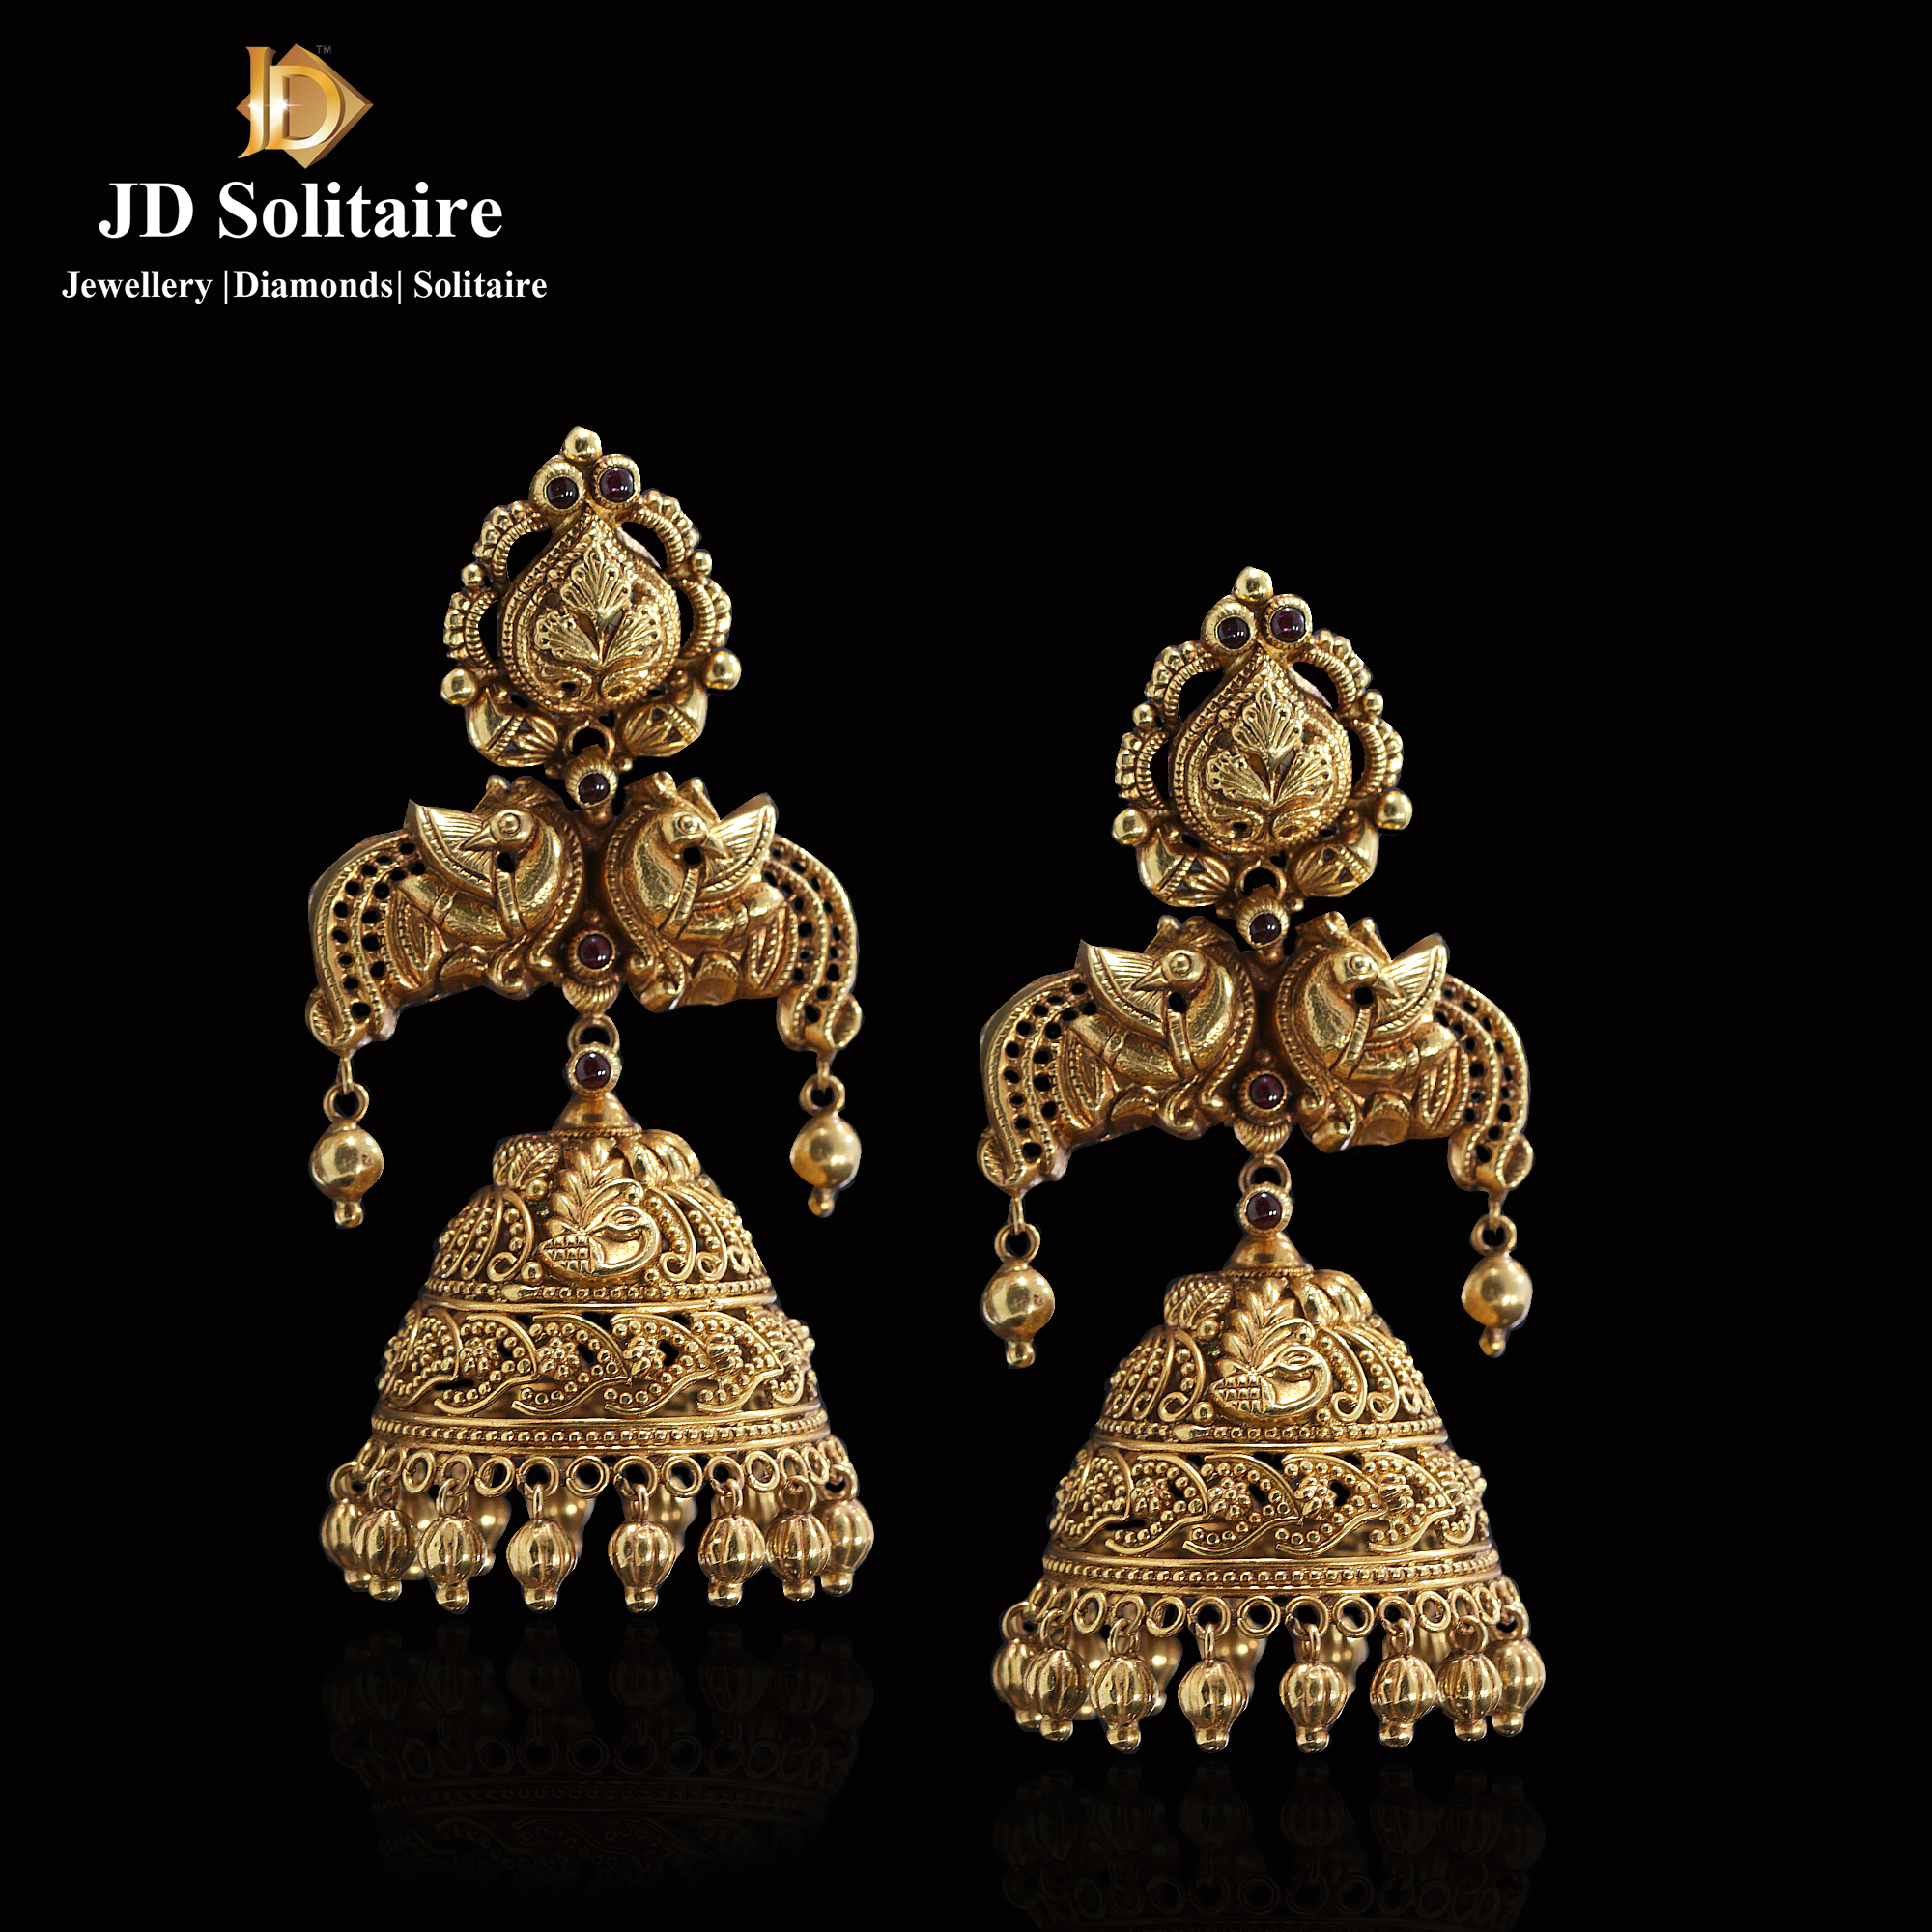 Details more than 114 new style earrings gold latest